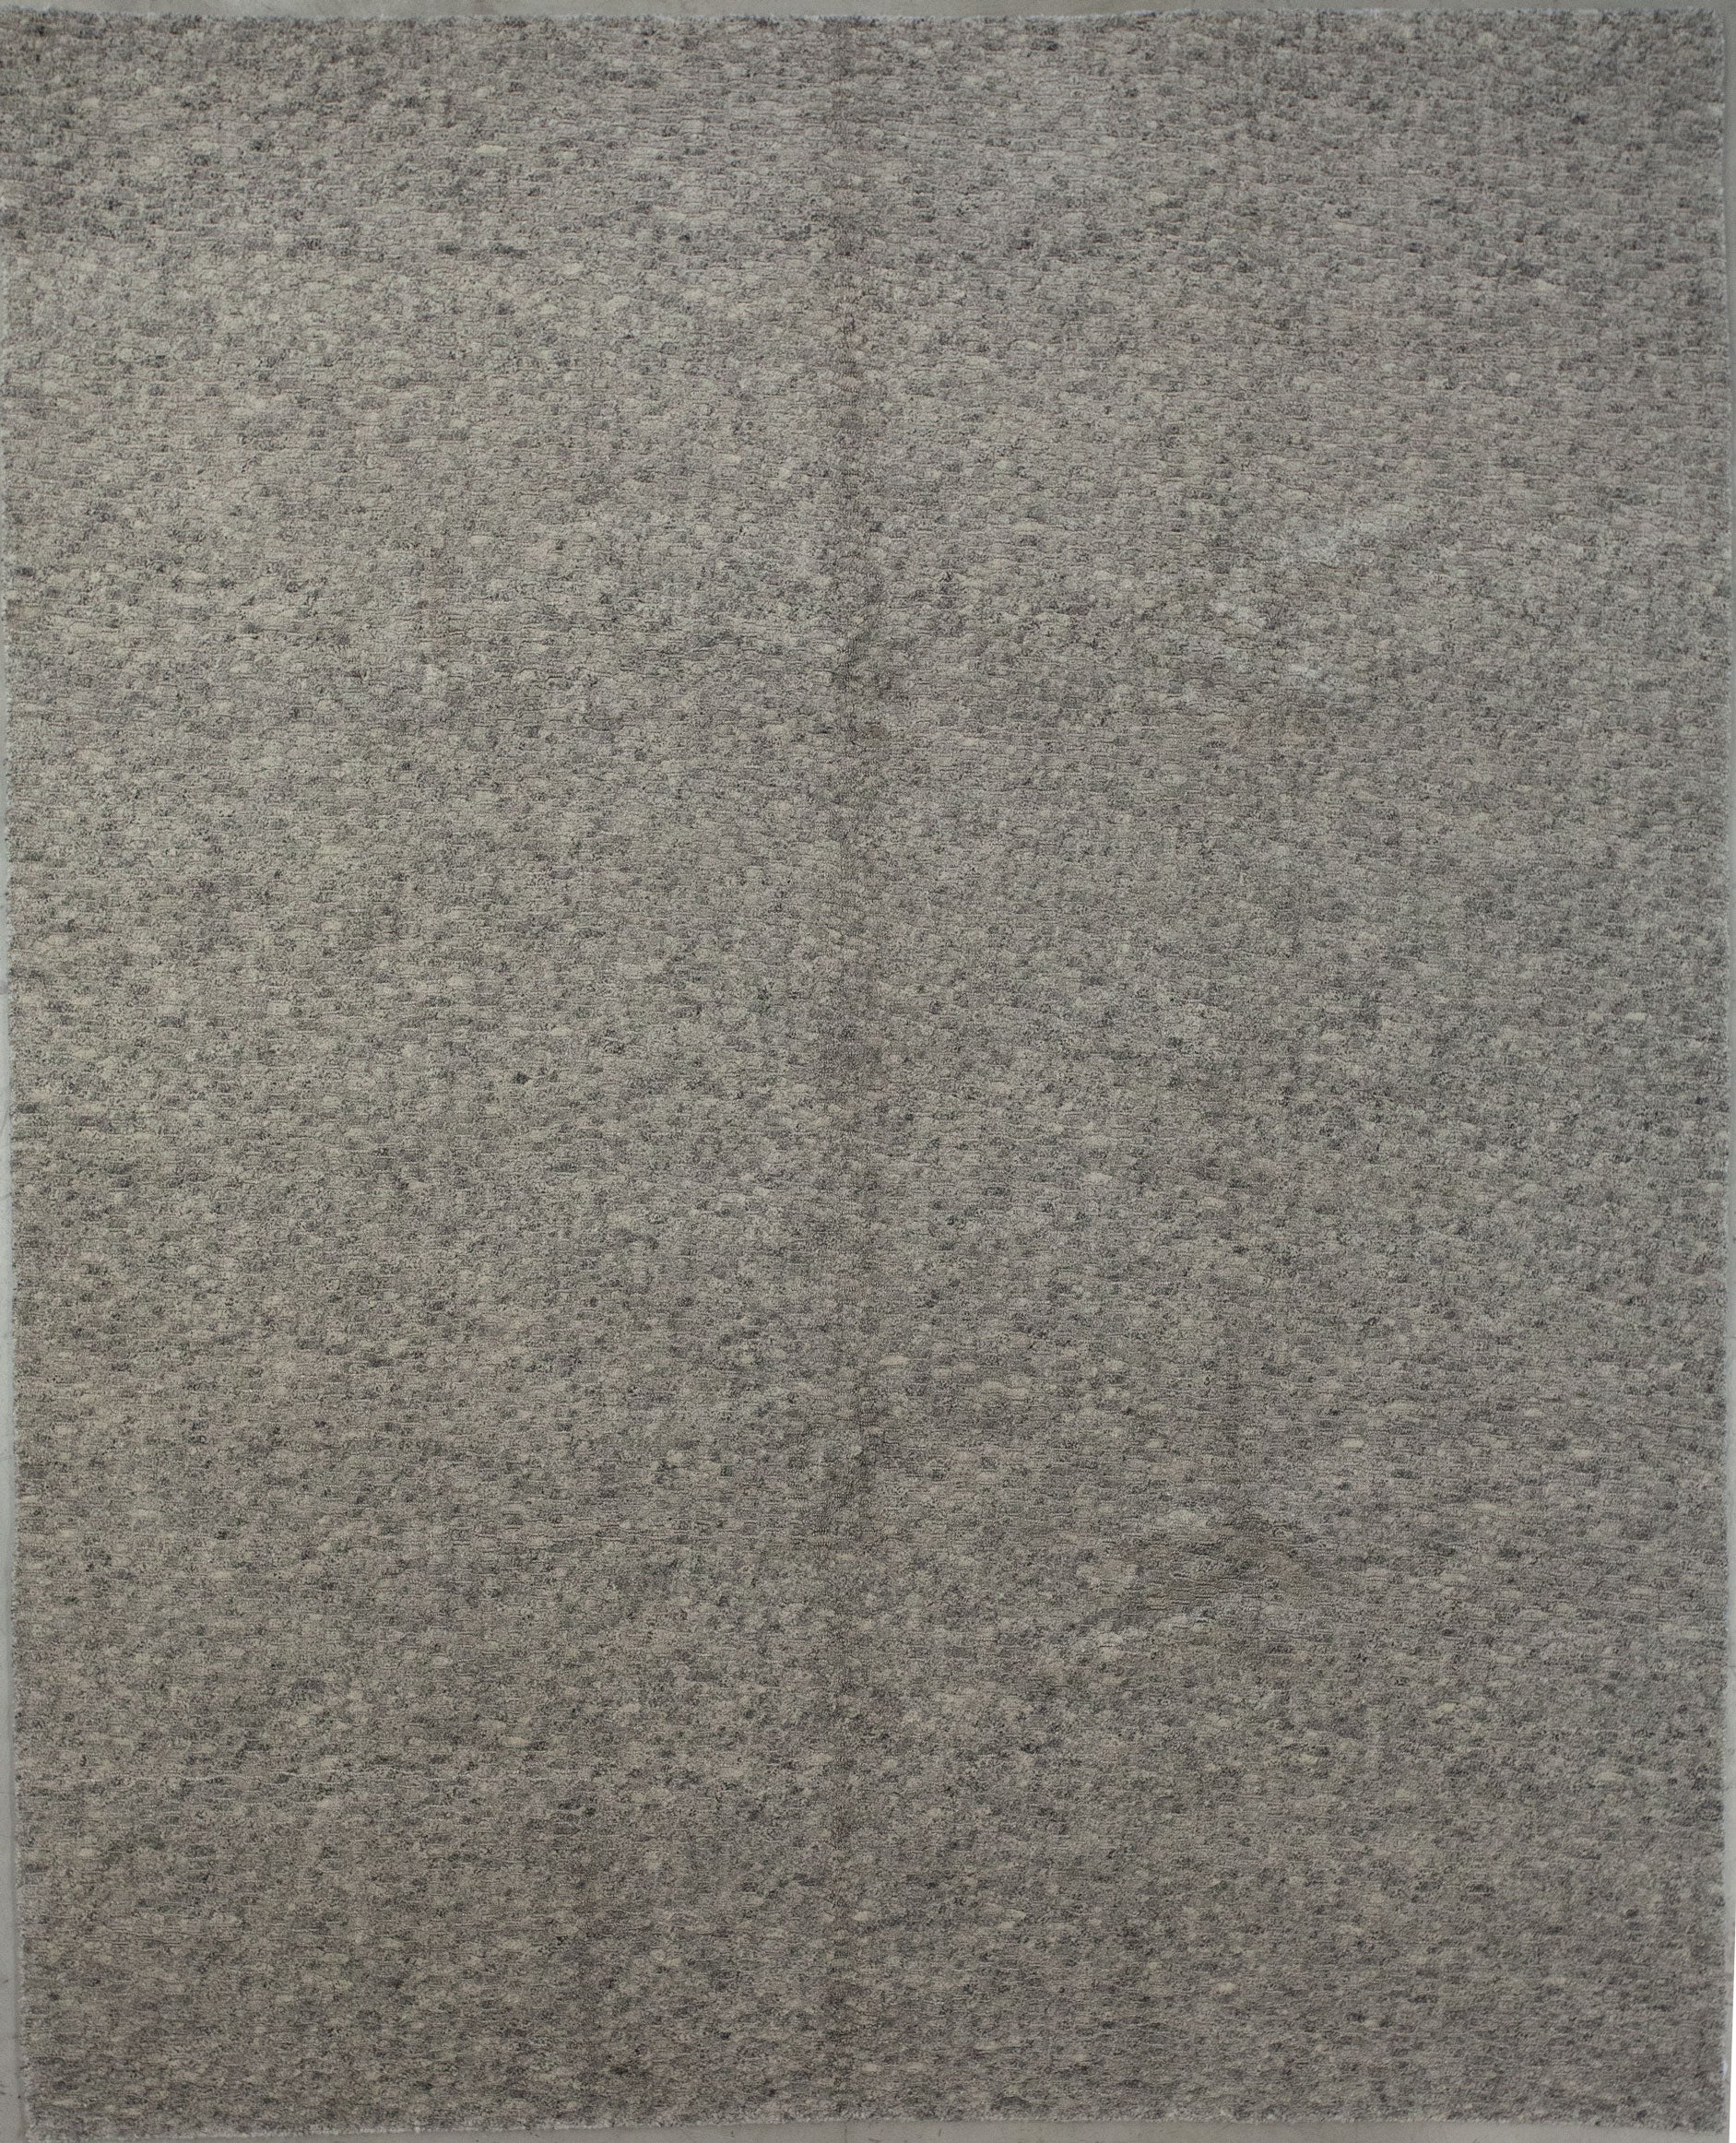 Modern carpet wove with gray and beige color scheme.